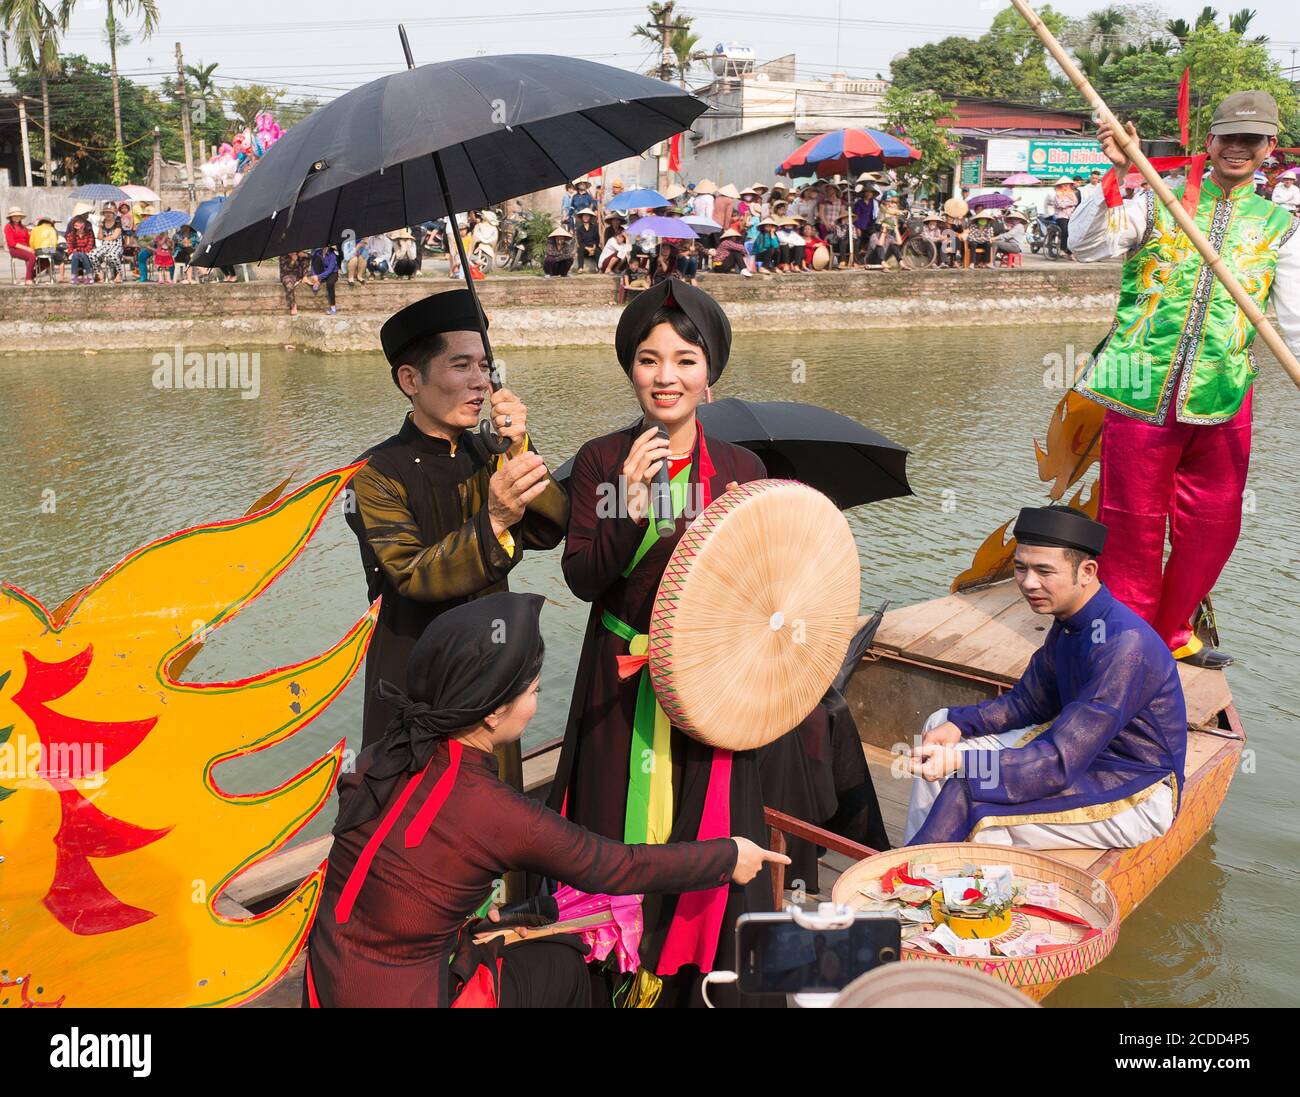 festival, folk singing on the boat. Intangible Heritage of Humanity, held at the lakes Bac Ninh, Vietnam Stock Photo